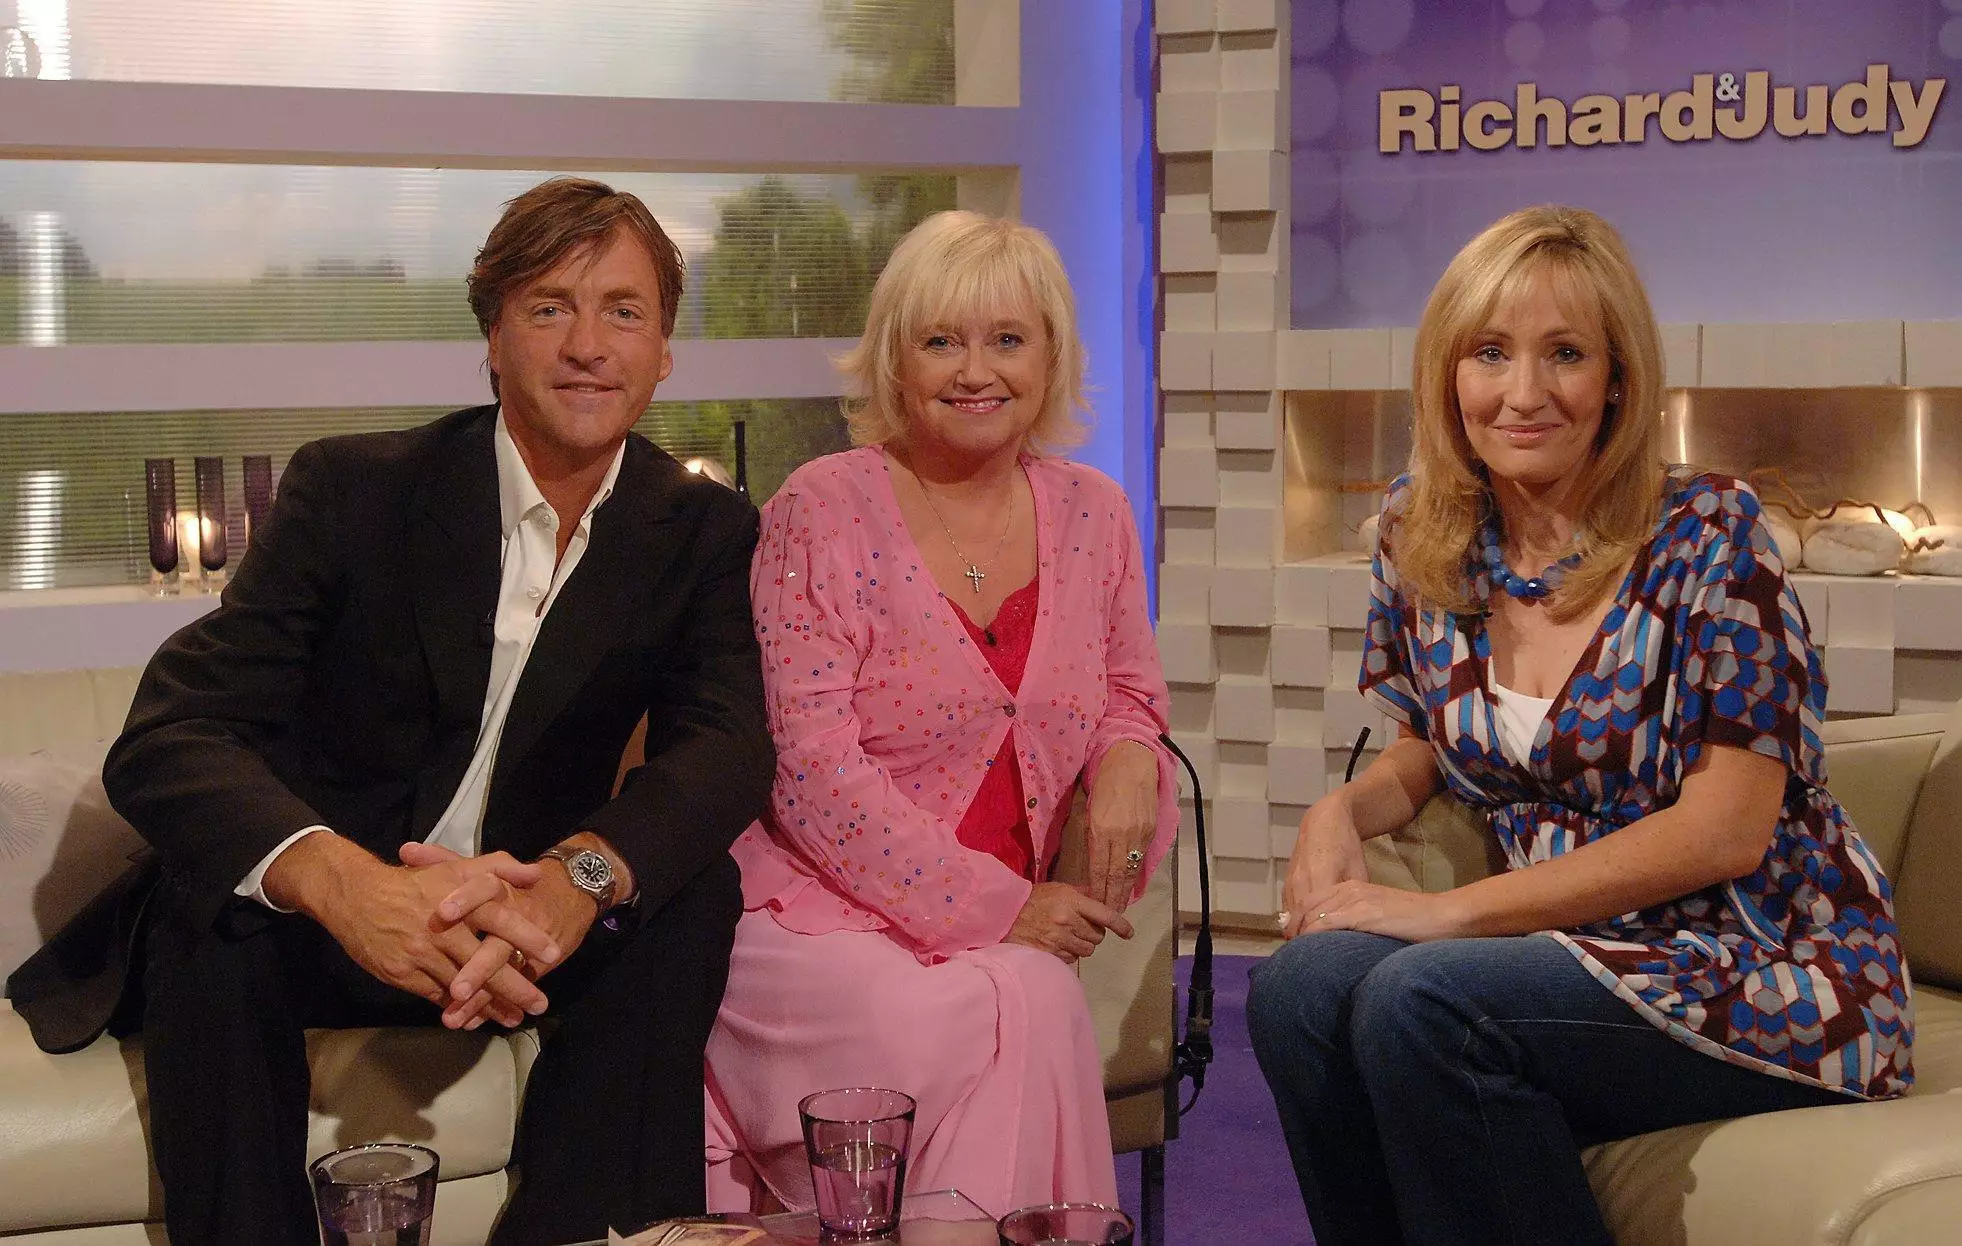 Richard and Judy haven't appeared on the channel since their chat show (